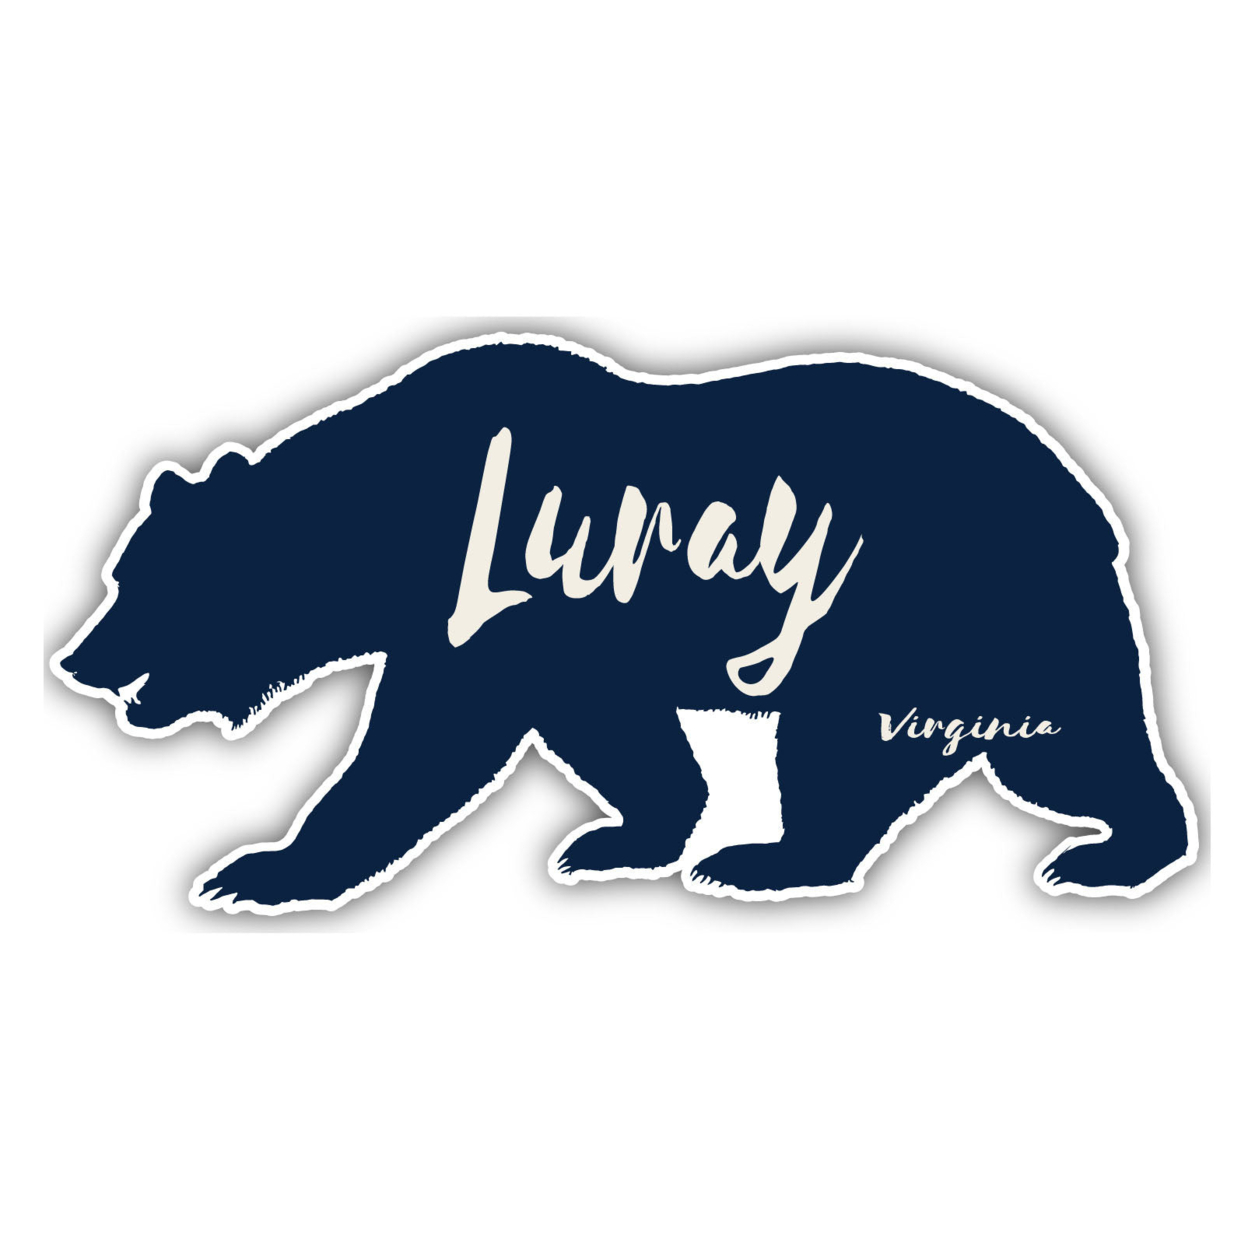 Luray Virginia Souvenir Decorative Stickers (Choose Theme And Size) - 4-Inch, Tent